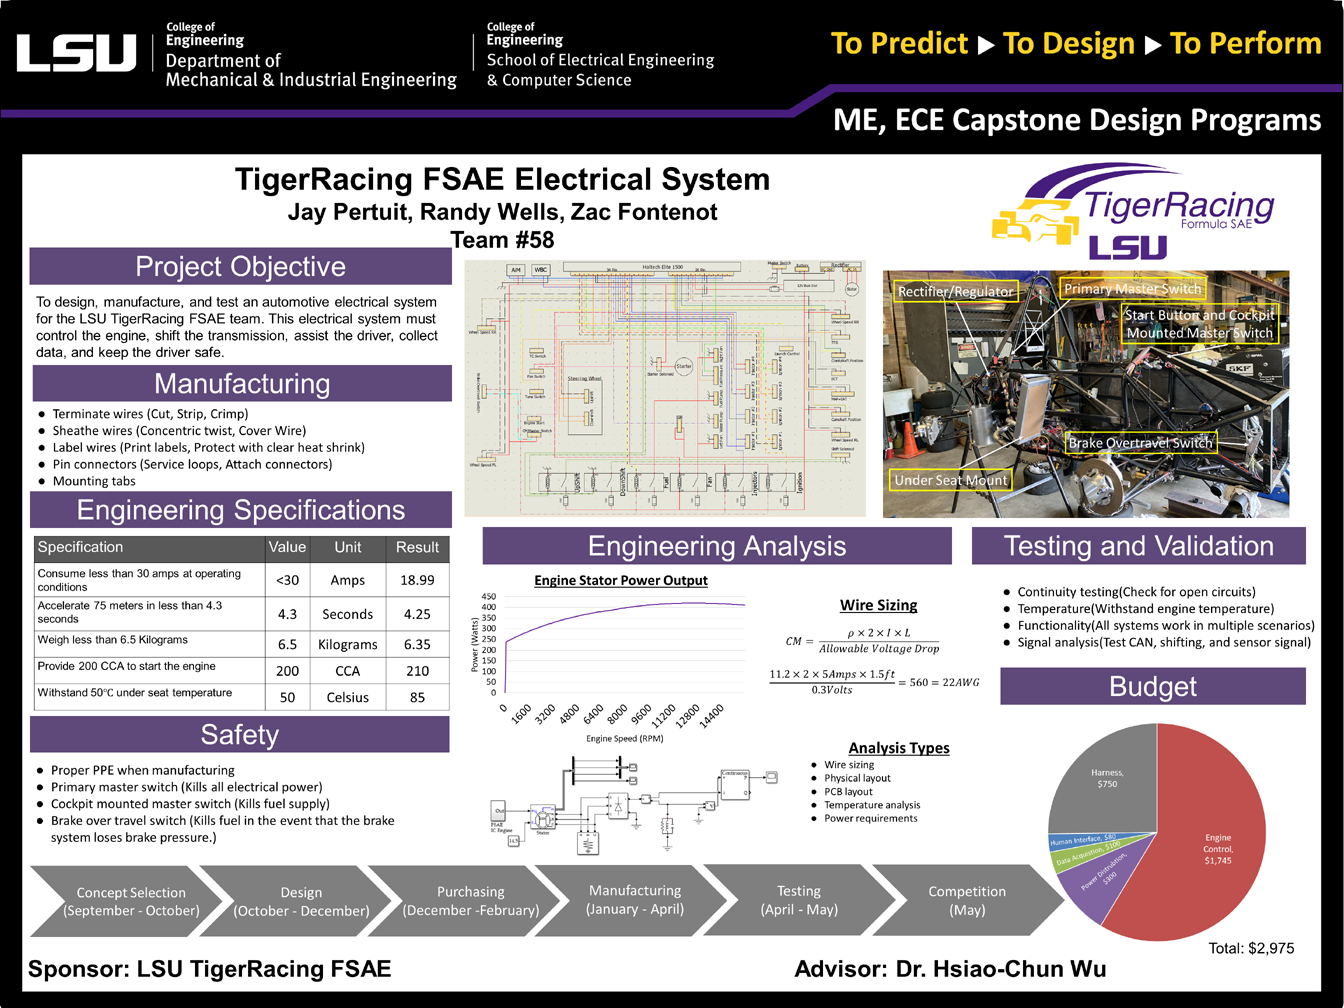 Project 58: TigerRacing FSAE Electrical System (2019)